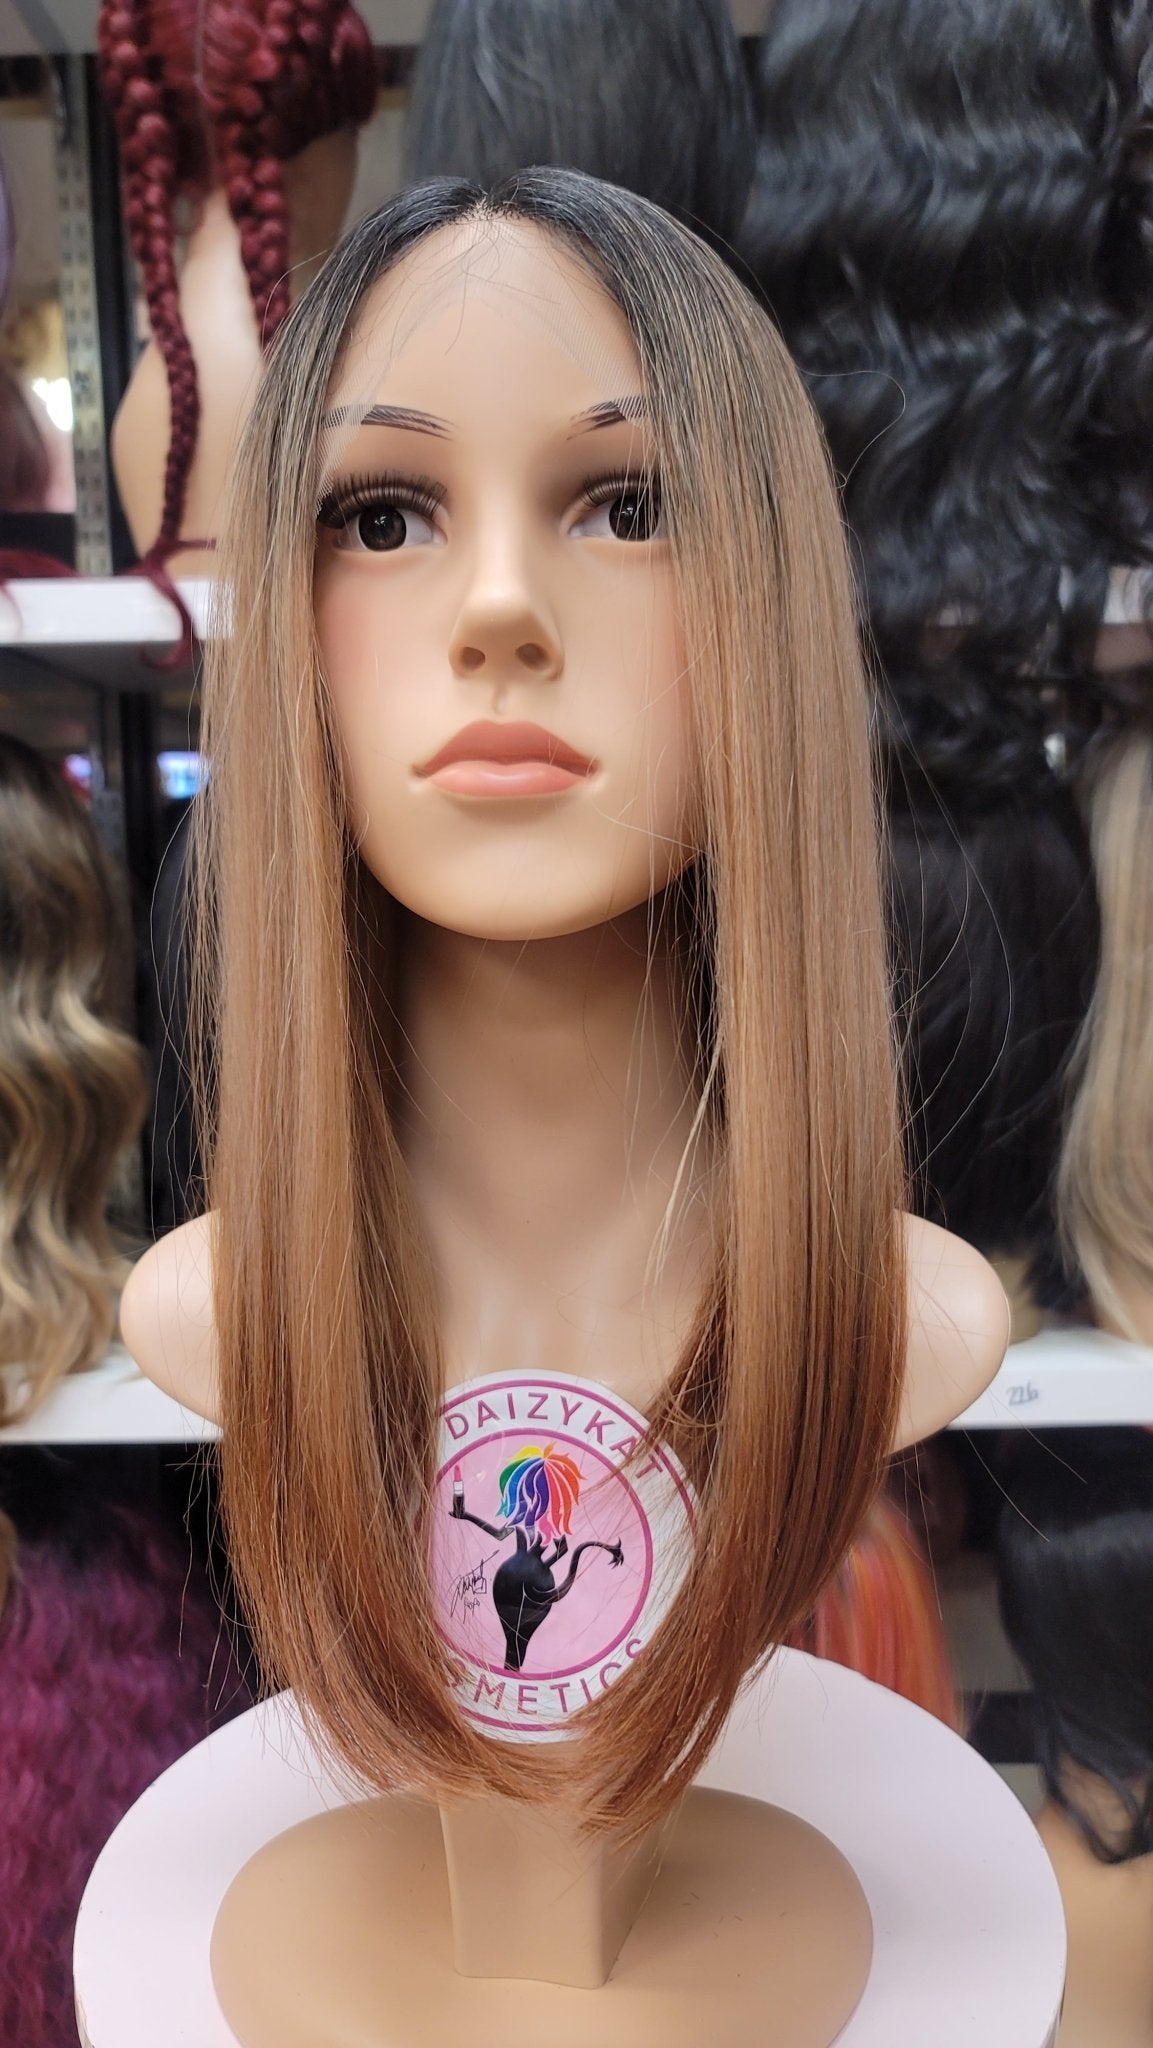 102 JACKIE - Middle Part Lace Front Wig - BLD.BRN - DaizyKat Cosmetics 102 JACKIE - Middle Part Lace Front Wig - BLD.BRN DaizyKat Cosmetics Wigs